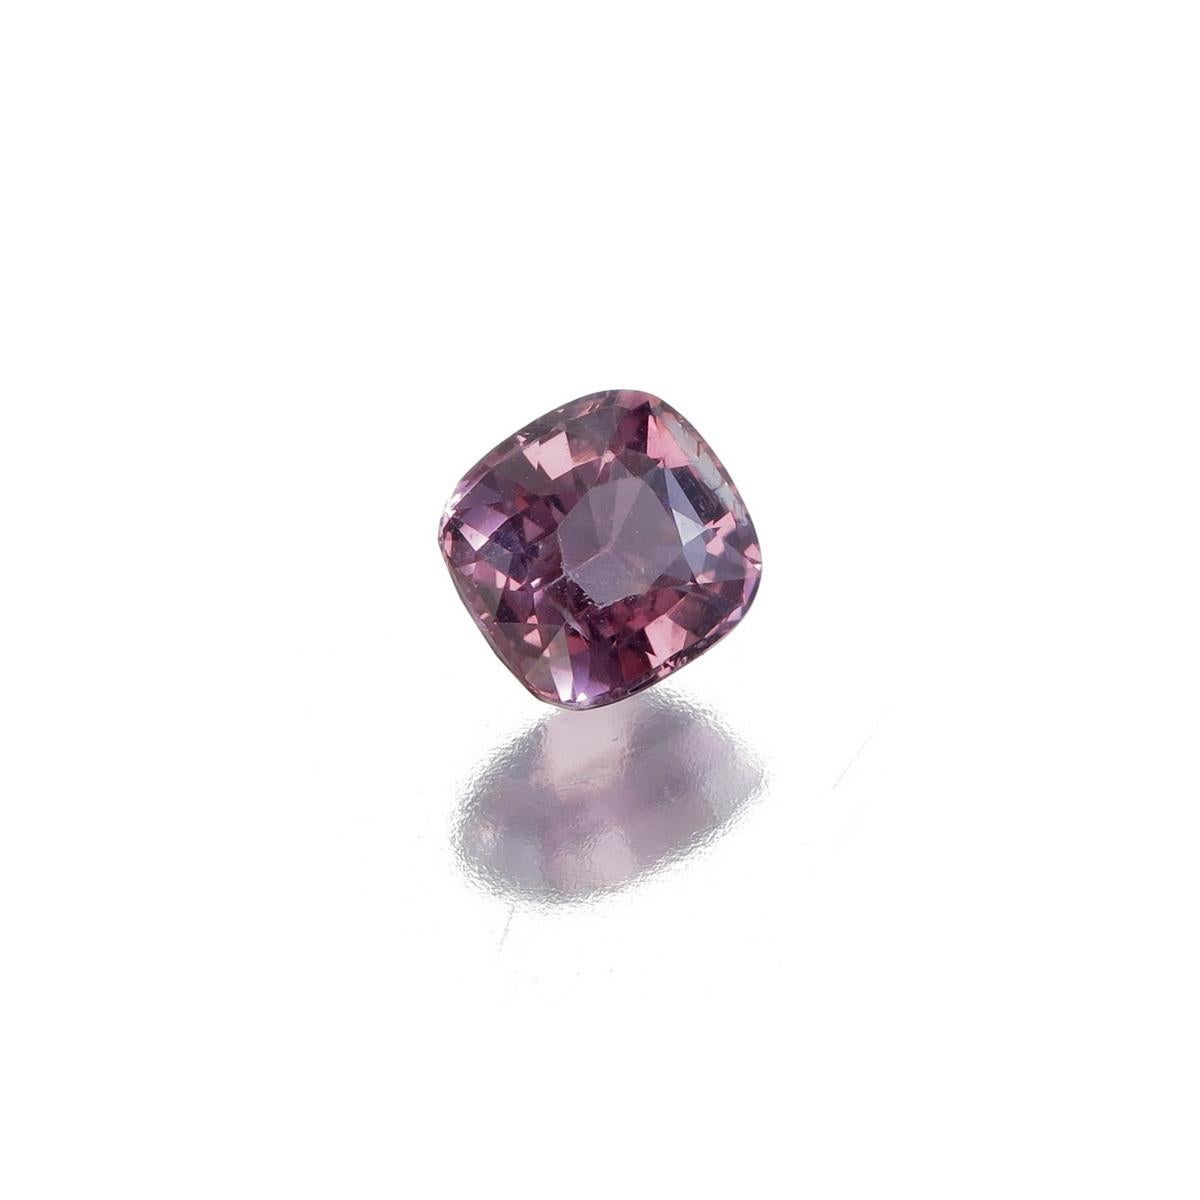 Untreated 1.16 Carat Natural Pink Spinel from Burma
Dimension 6.23 x 5.83 x 3.71 mm
Shape: Cushion Cut
Weight: 1.16 Carat
